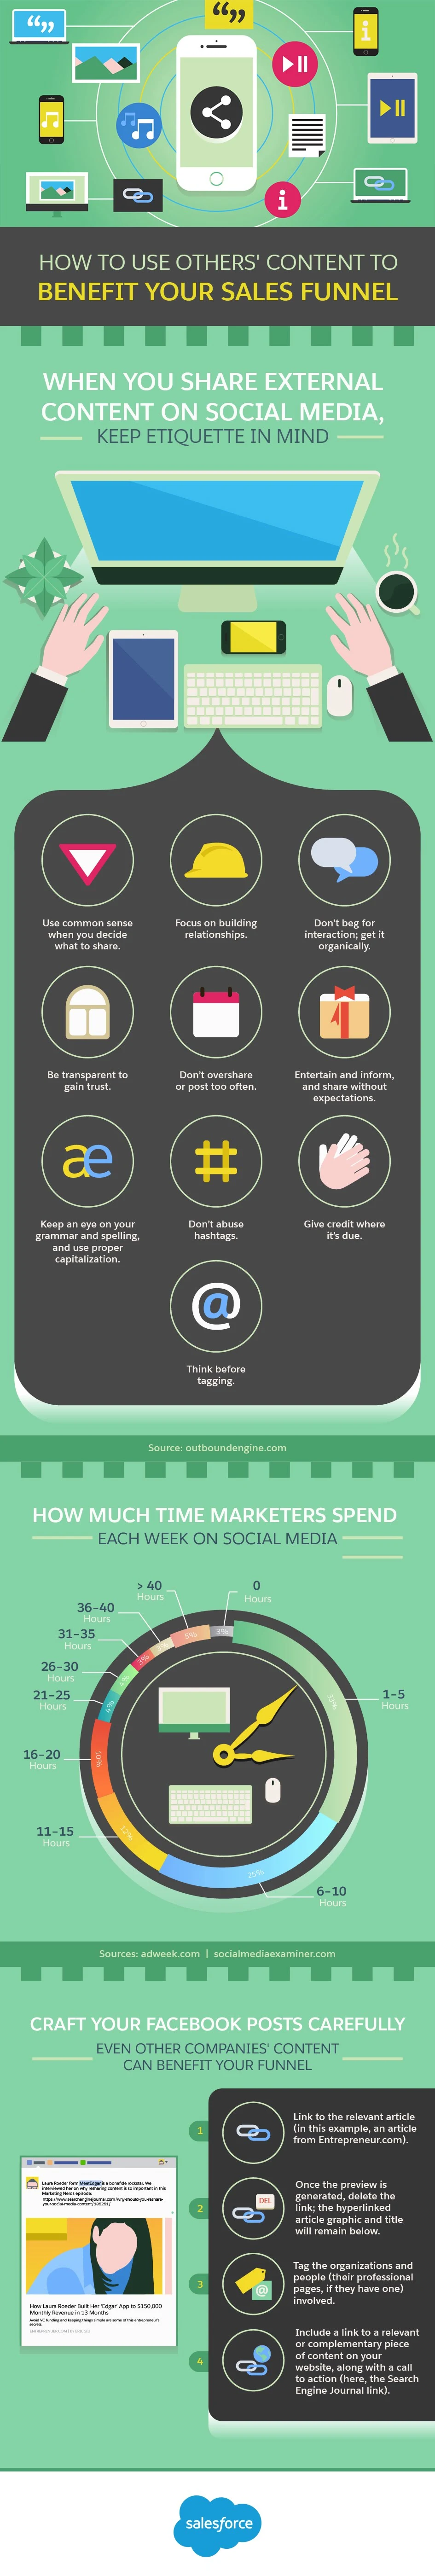 How to Use Others' Content to Benefit Your Sales Funnel - #infographic